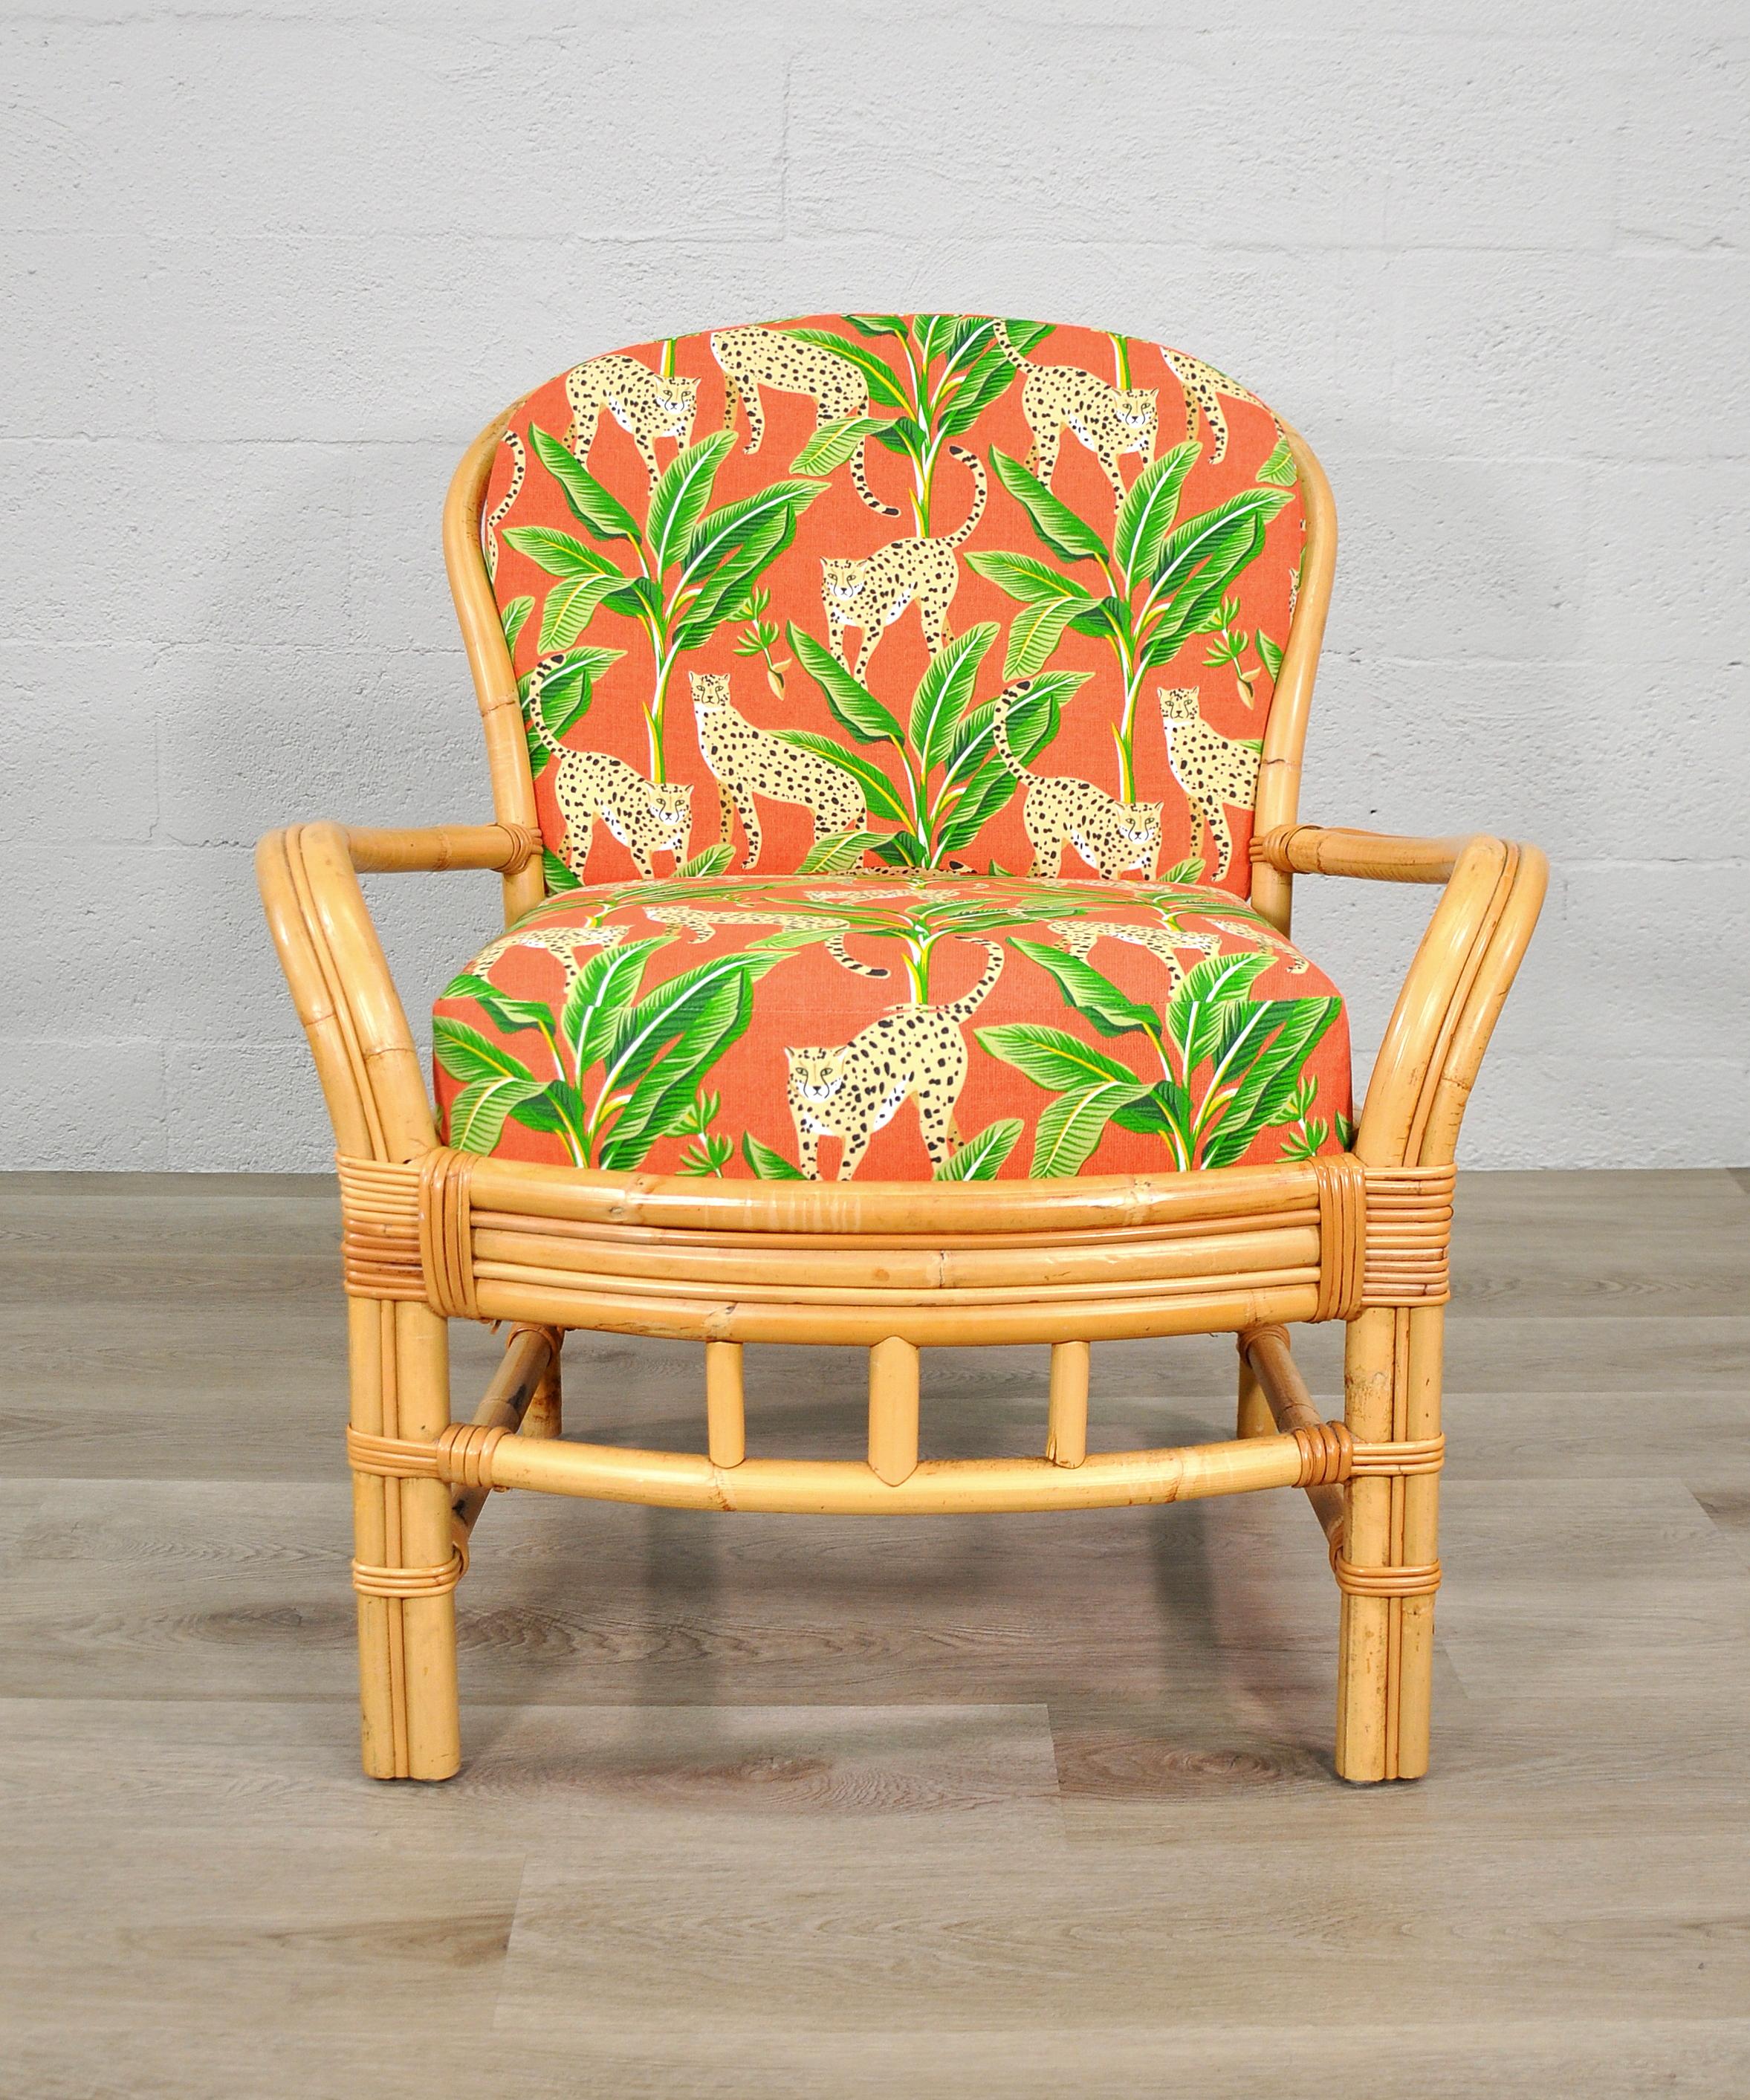 Rattan Chair with Tropical Cheetah and Palm Fabric For Sale 1